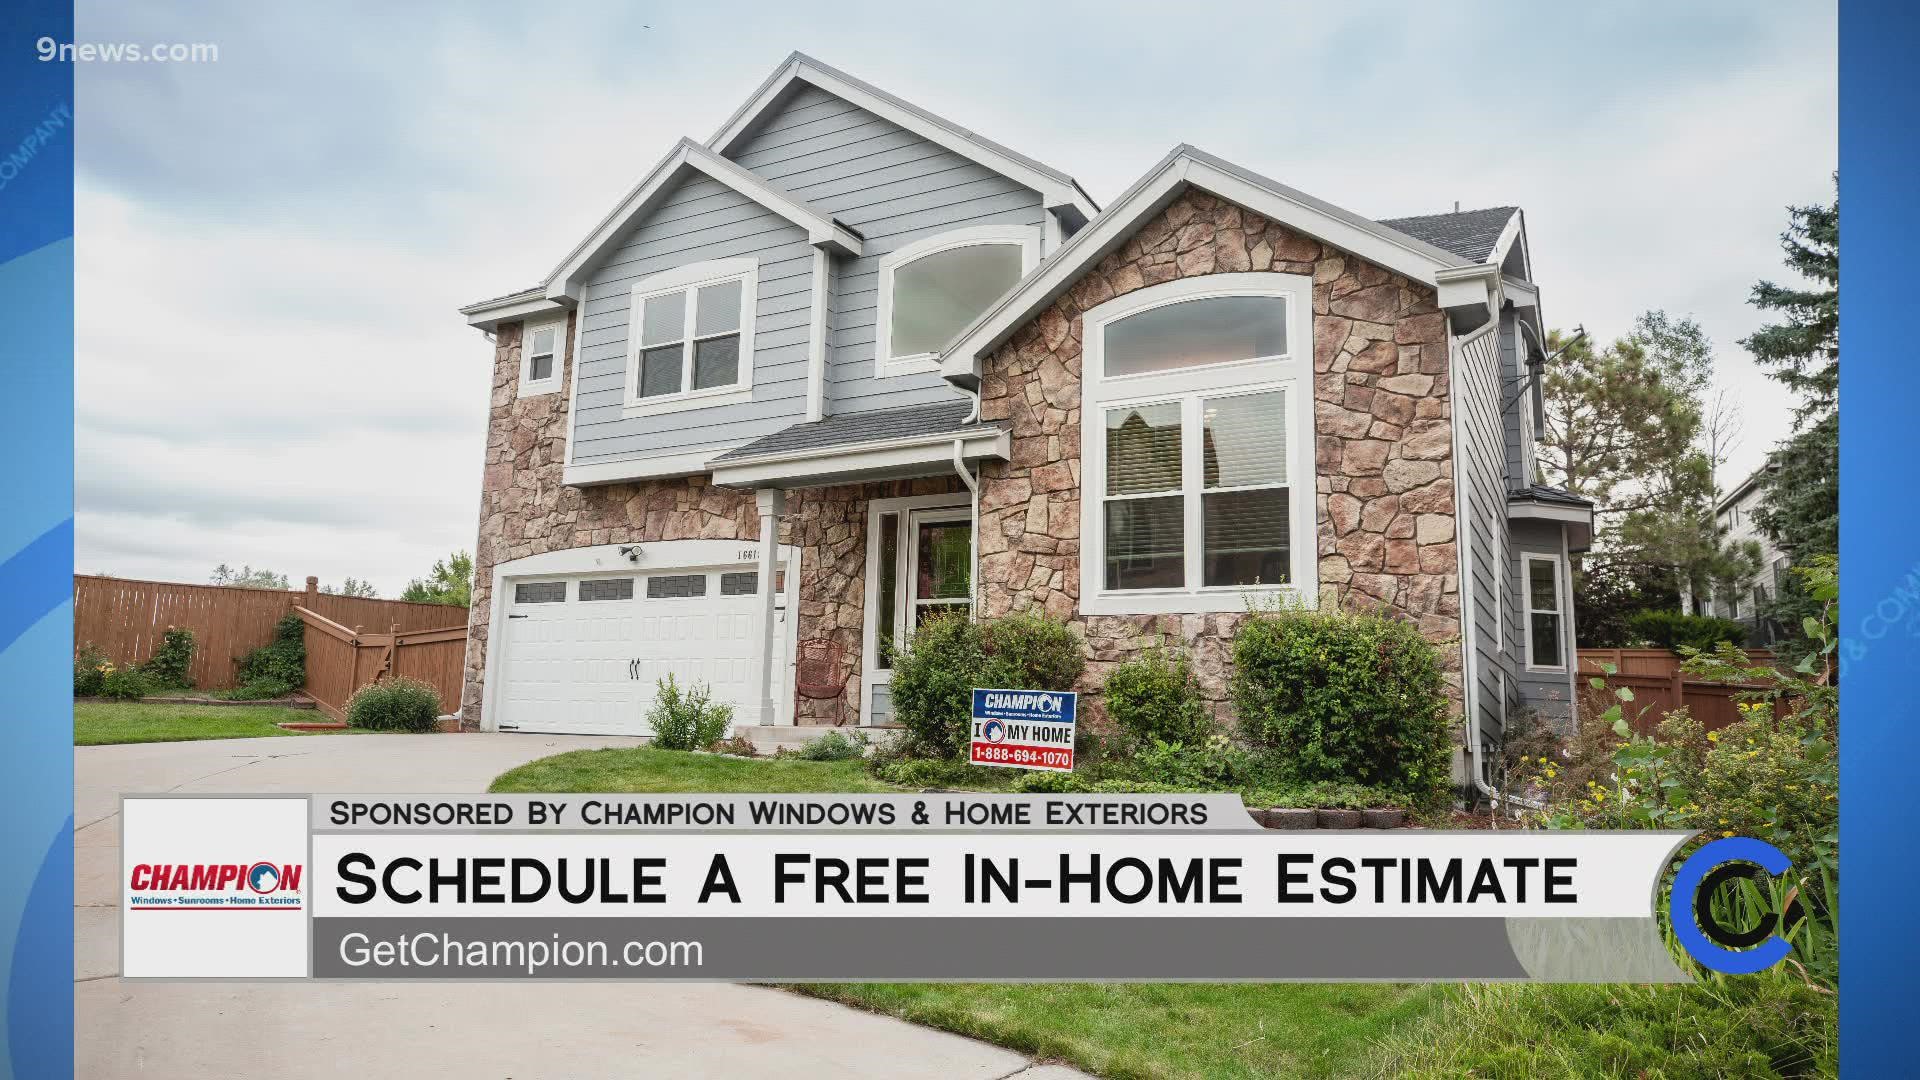 Schedule a free in-home estimate at GetChampion.com and find out how you can save 30% on windows, siding and sunrooms! **PAID CONTENT**